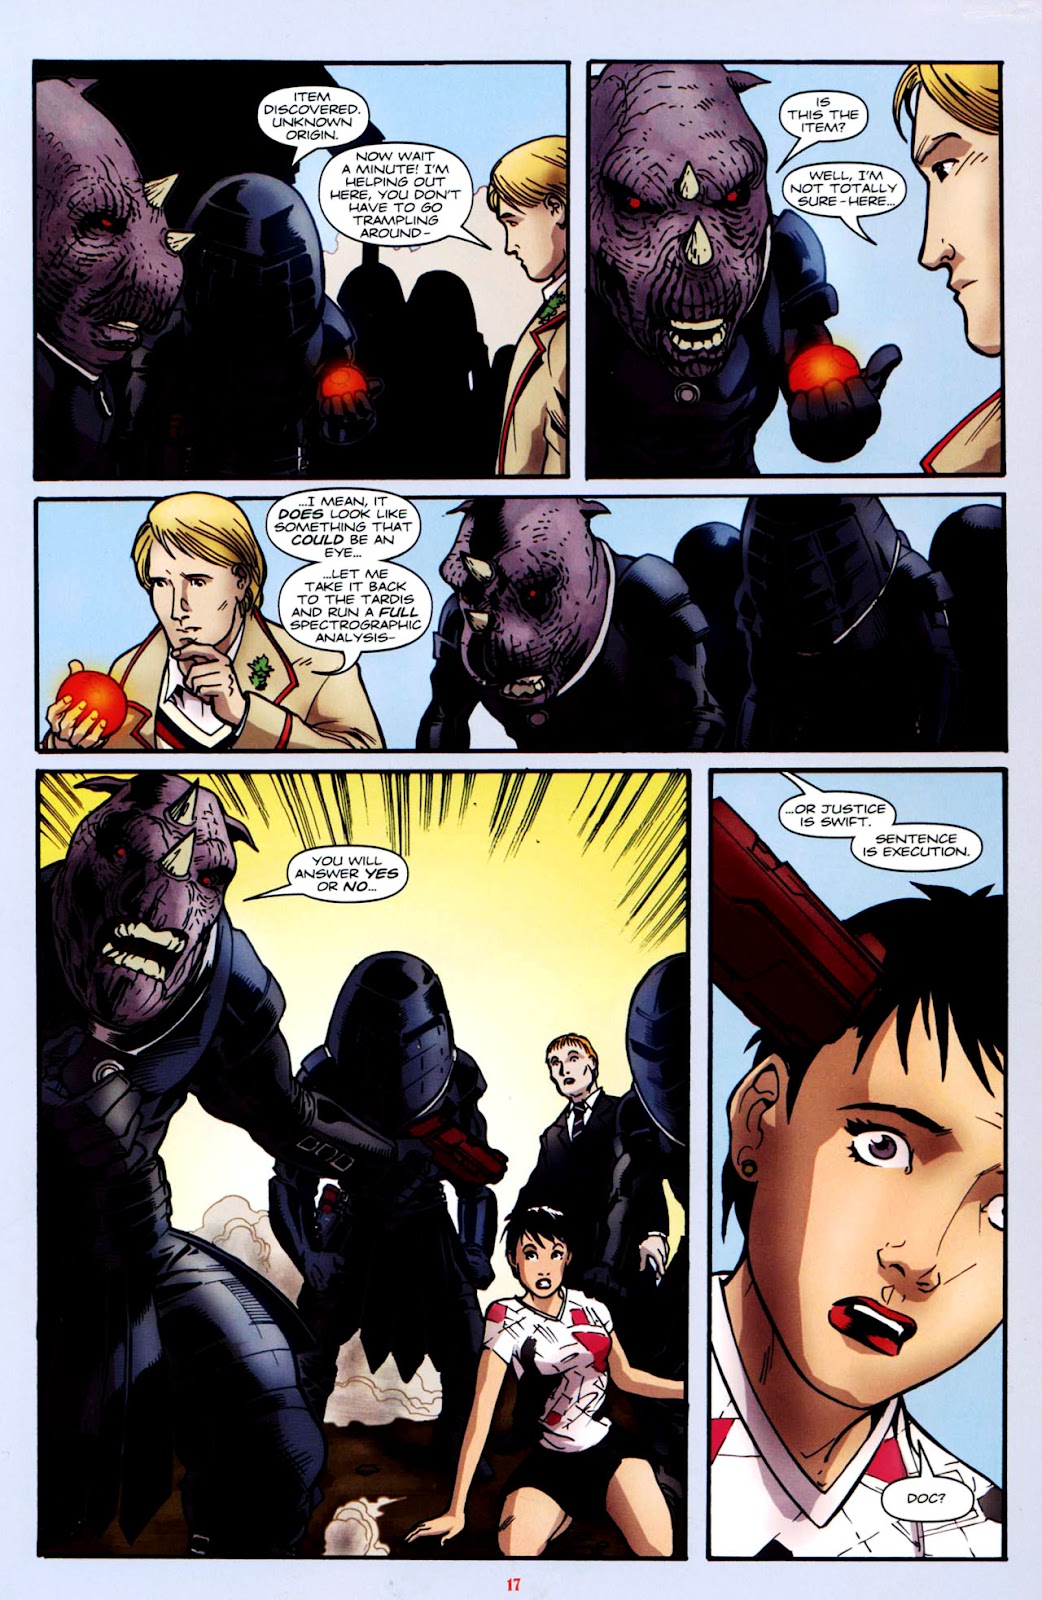 Doctor Who: The Forgotten issue 3 - Page 18